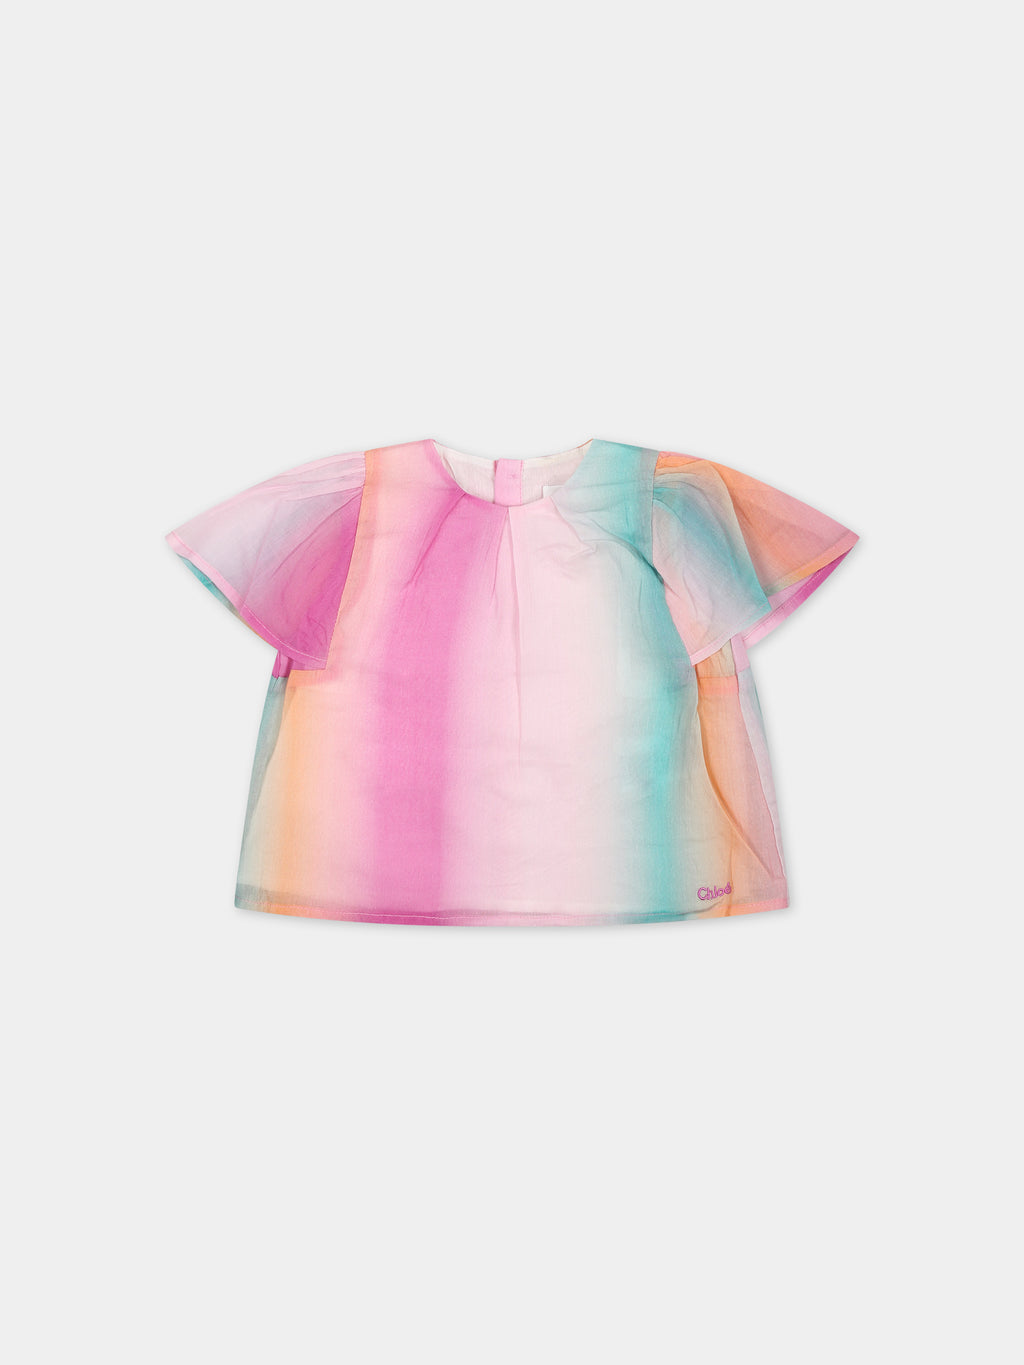 Multicolor top for baby girl